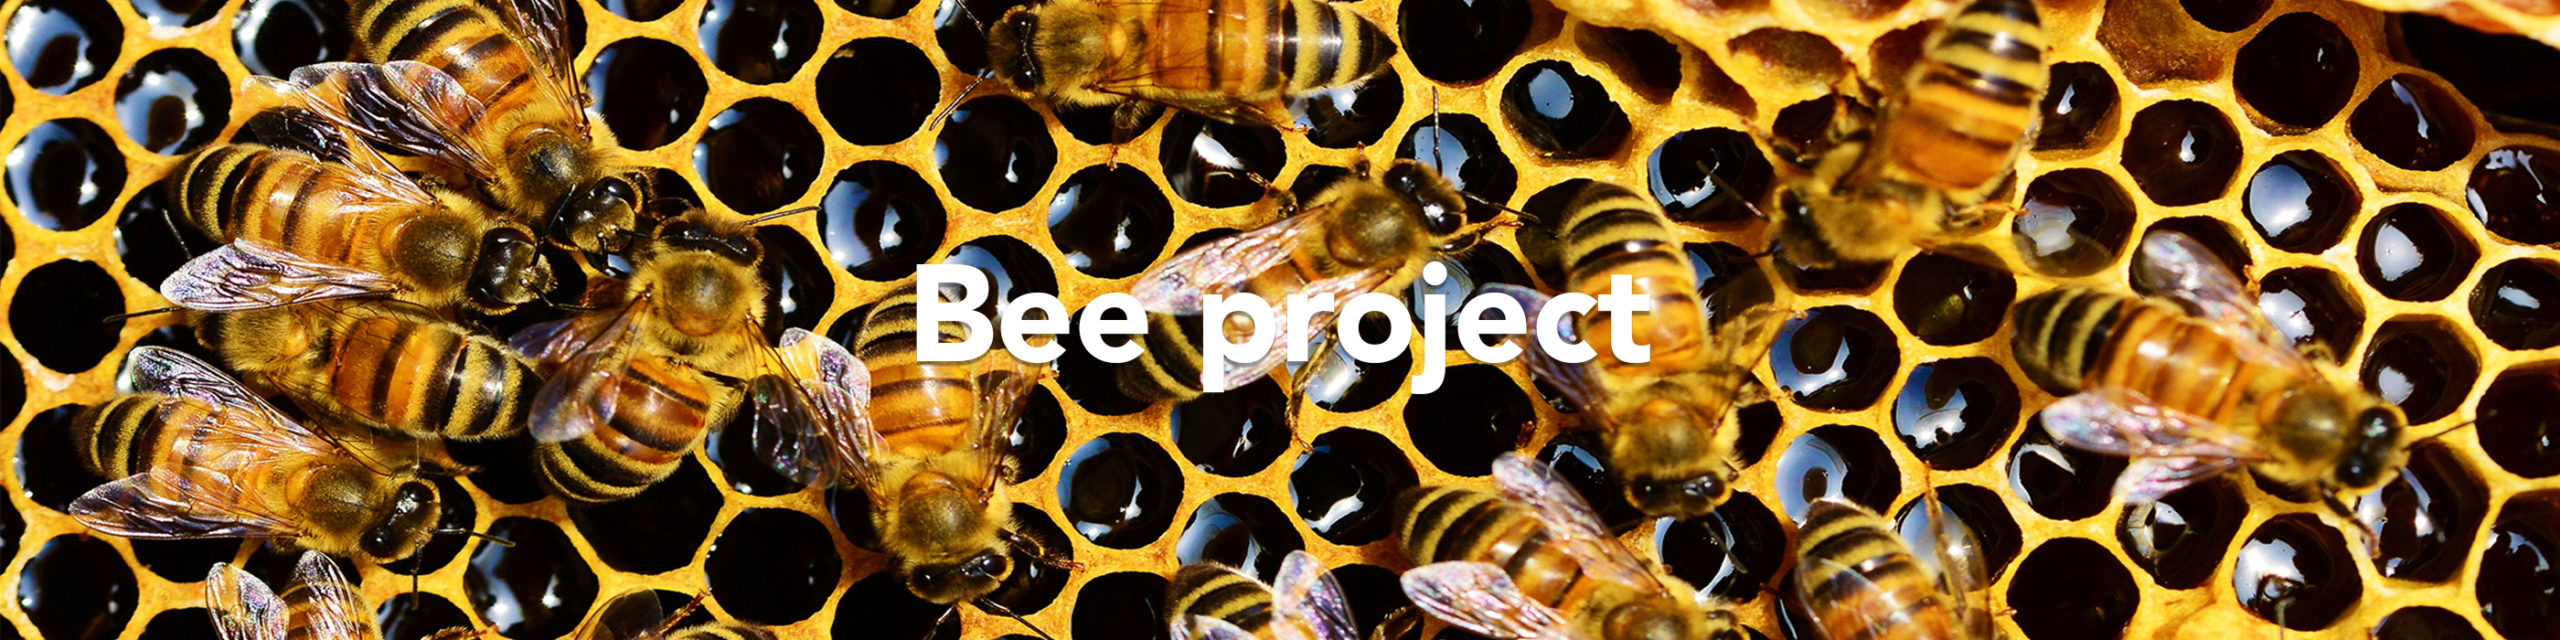 Bees on a hive saying "Bee project"